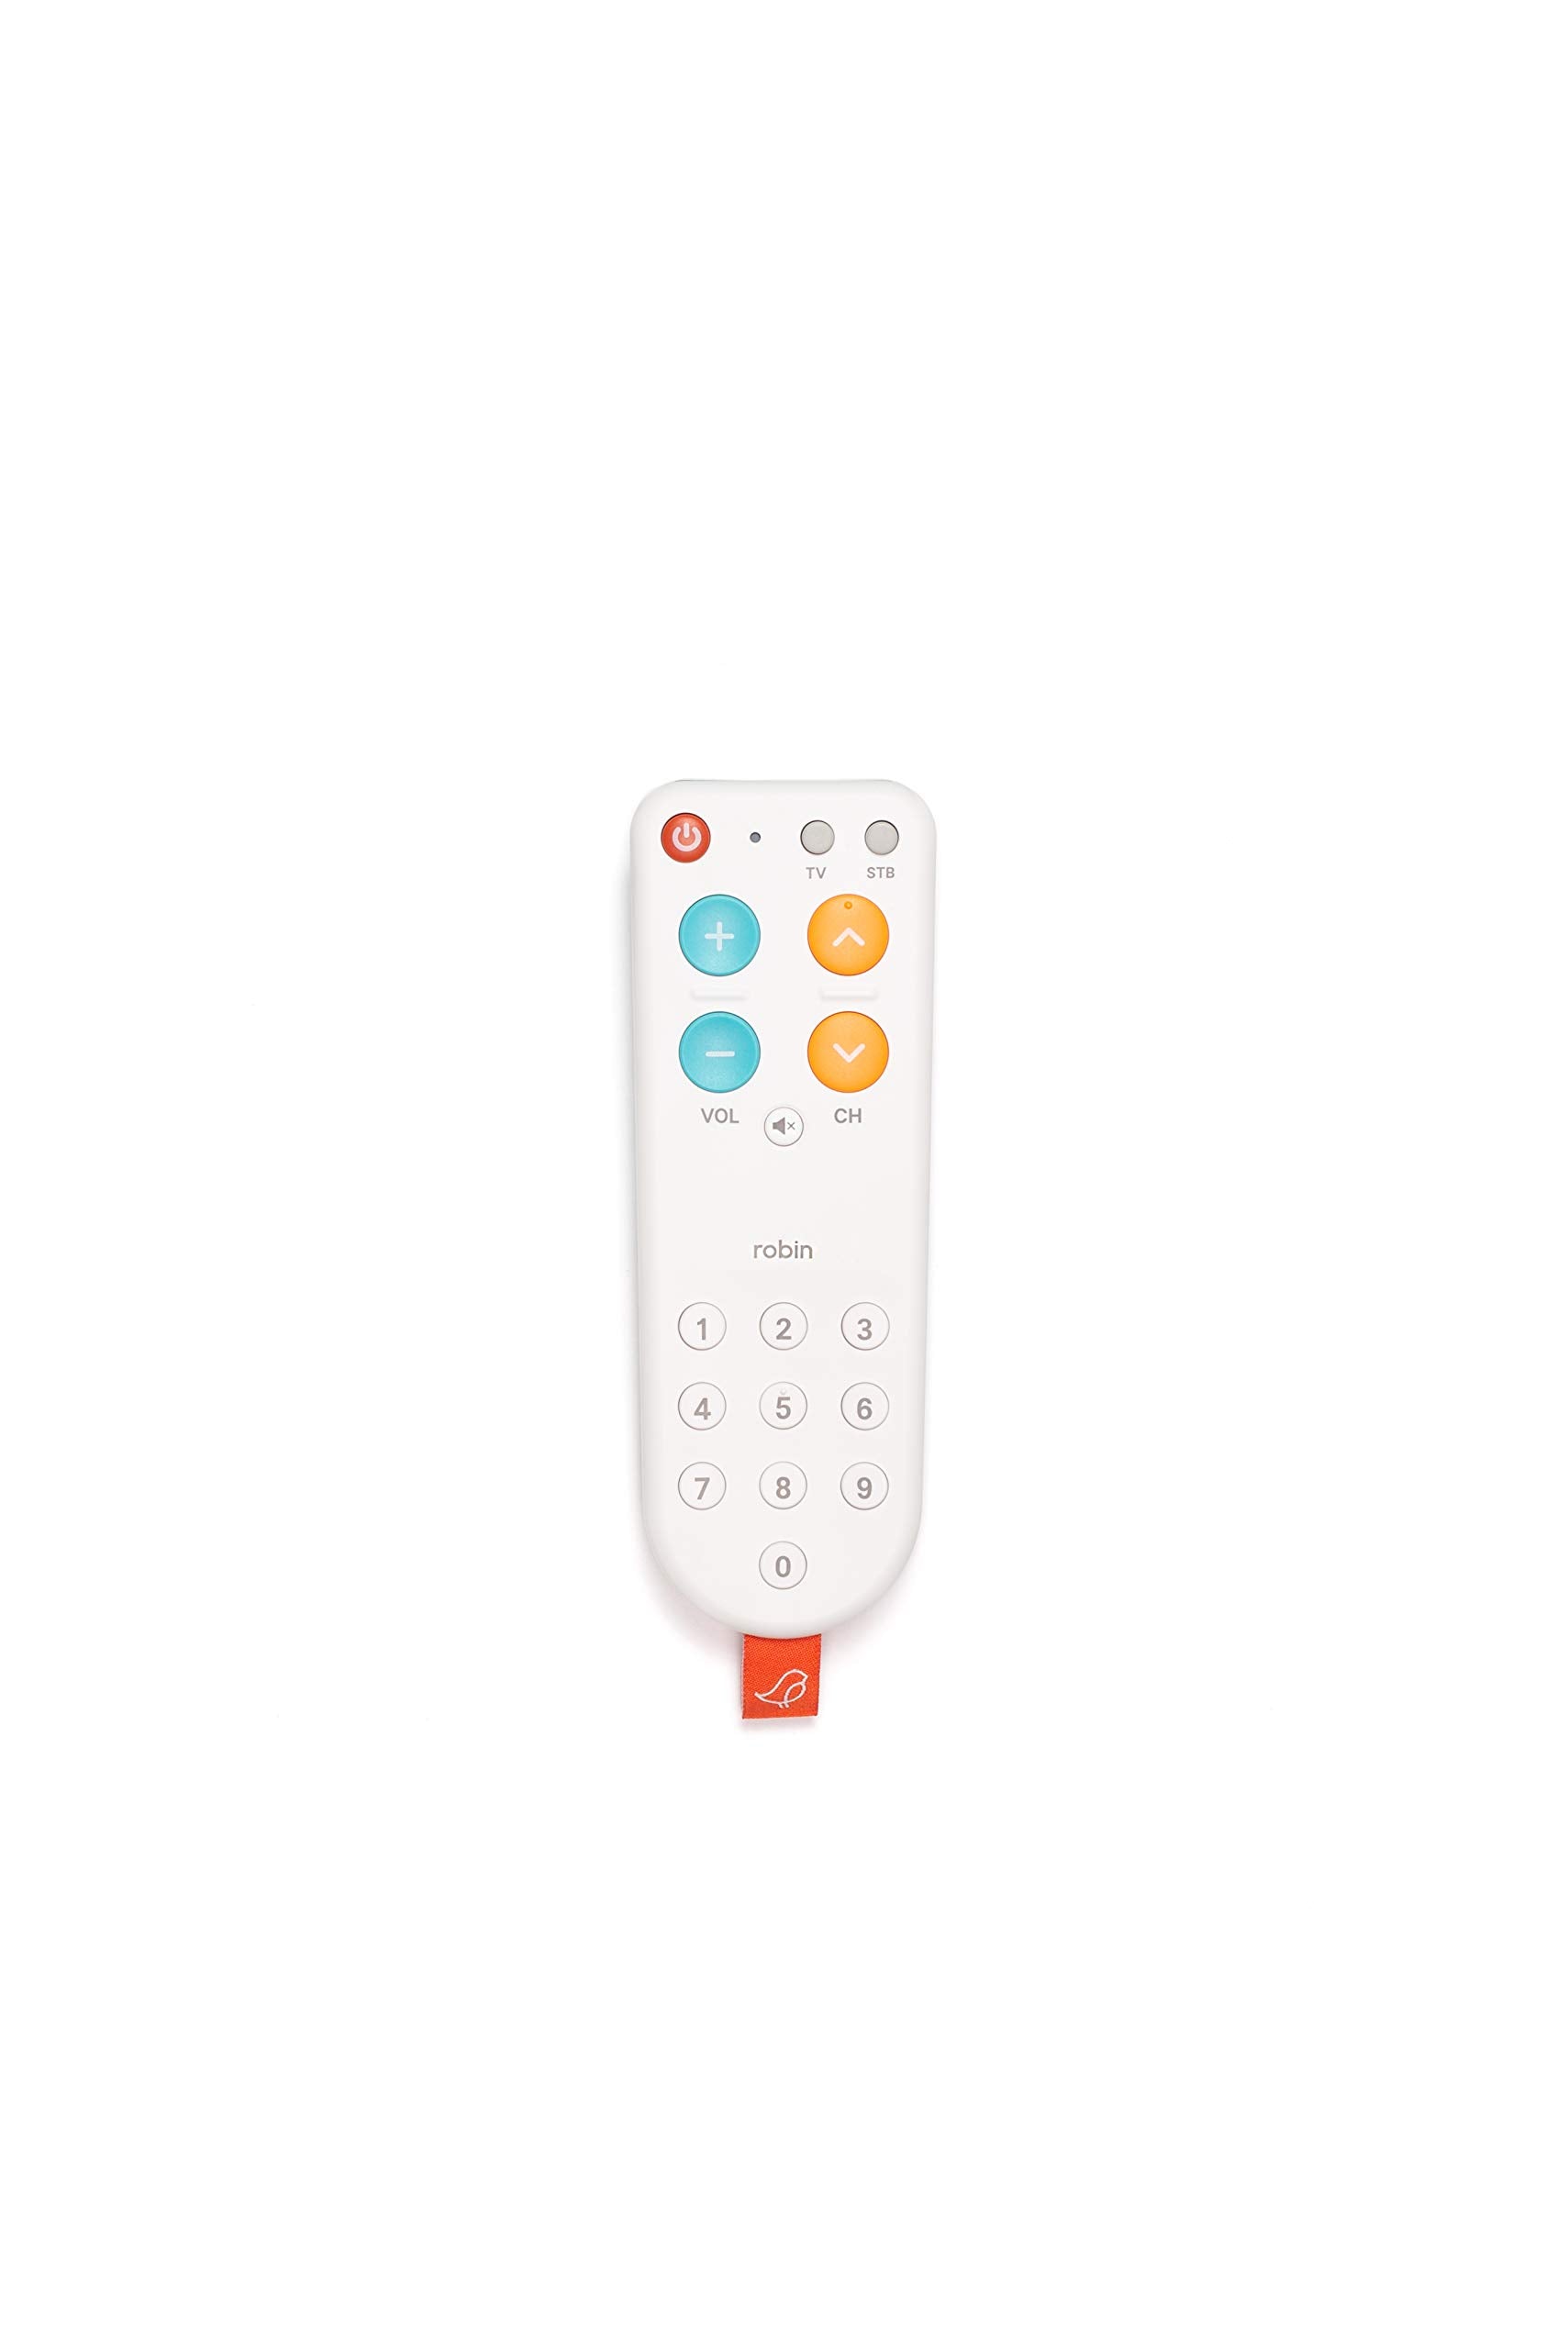 Robin Remote - Big Button Remote for Seniors - Universal, Automatic Set-Up, Easy Use, Ideal for Elder Care, Works with IR TVs, Cable & Satellite  - Like New